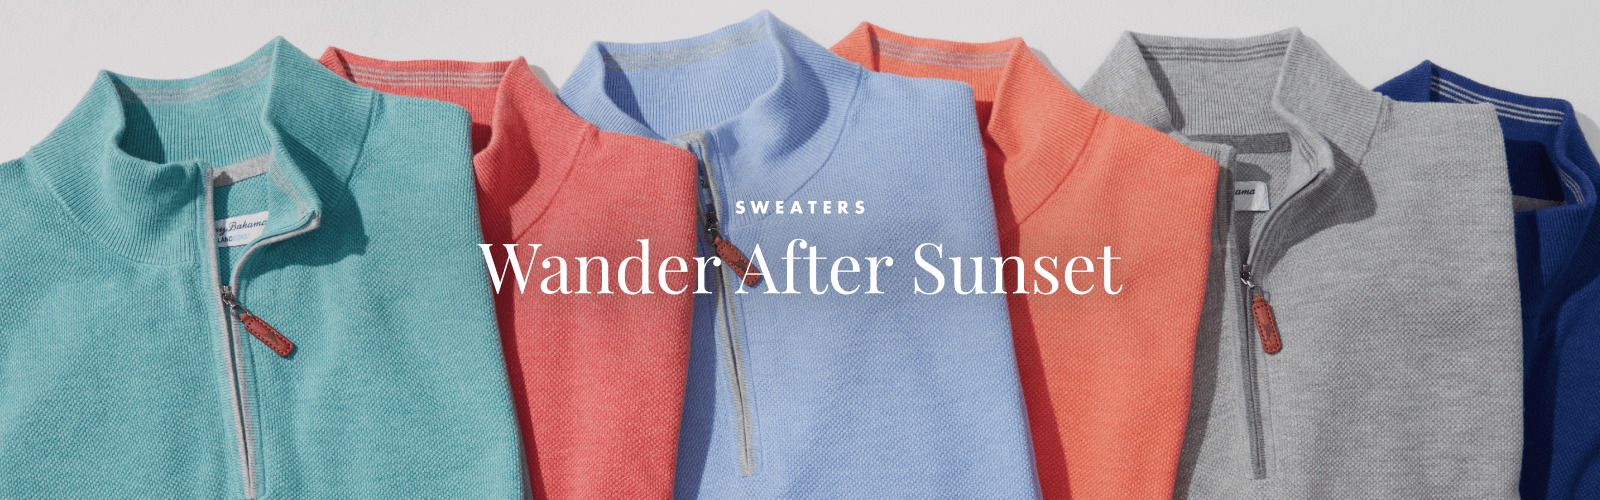 Sweaters: Wander After Sunset